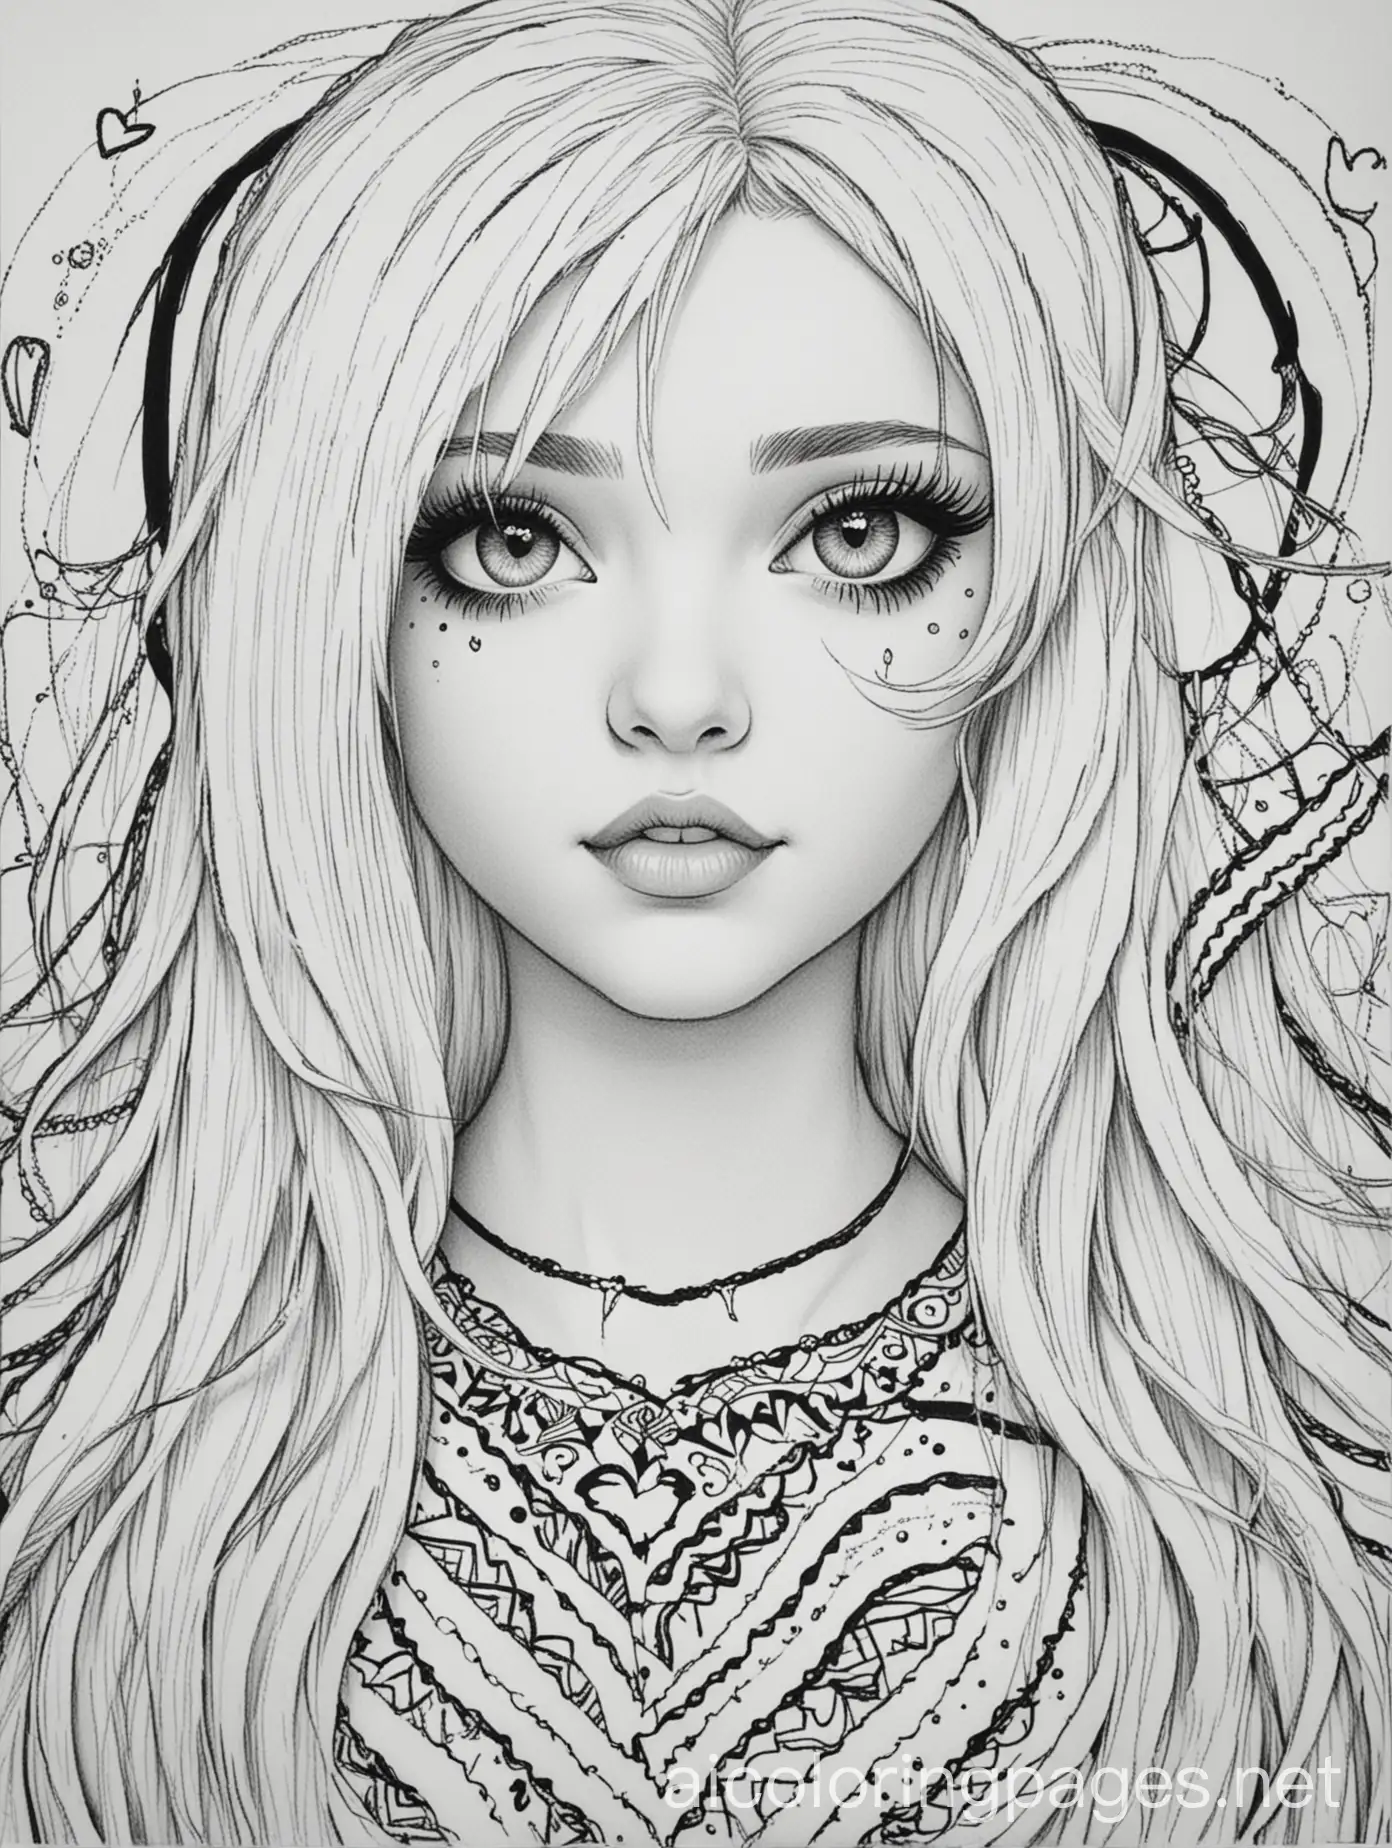 goth, teen, coloring page, black and white, line art, white background, simplicity, ample white space, light hair, heart throb, Coloring Page, black and white, line art, white background, Simplicity, Ample White Space. The background of the coloring page is plain white to make it easy for young children to color within the lines. The outlines of all the subjects are easy to distinguish, making it simple for kids to color without too much difficulty